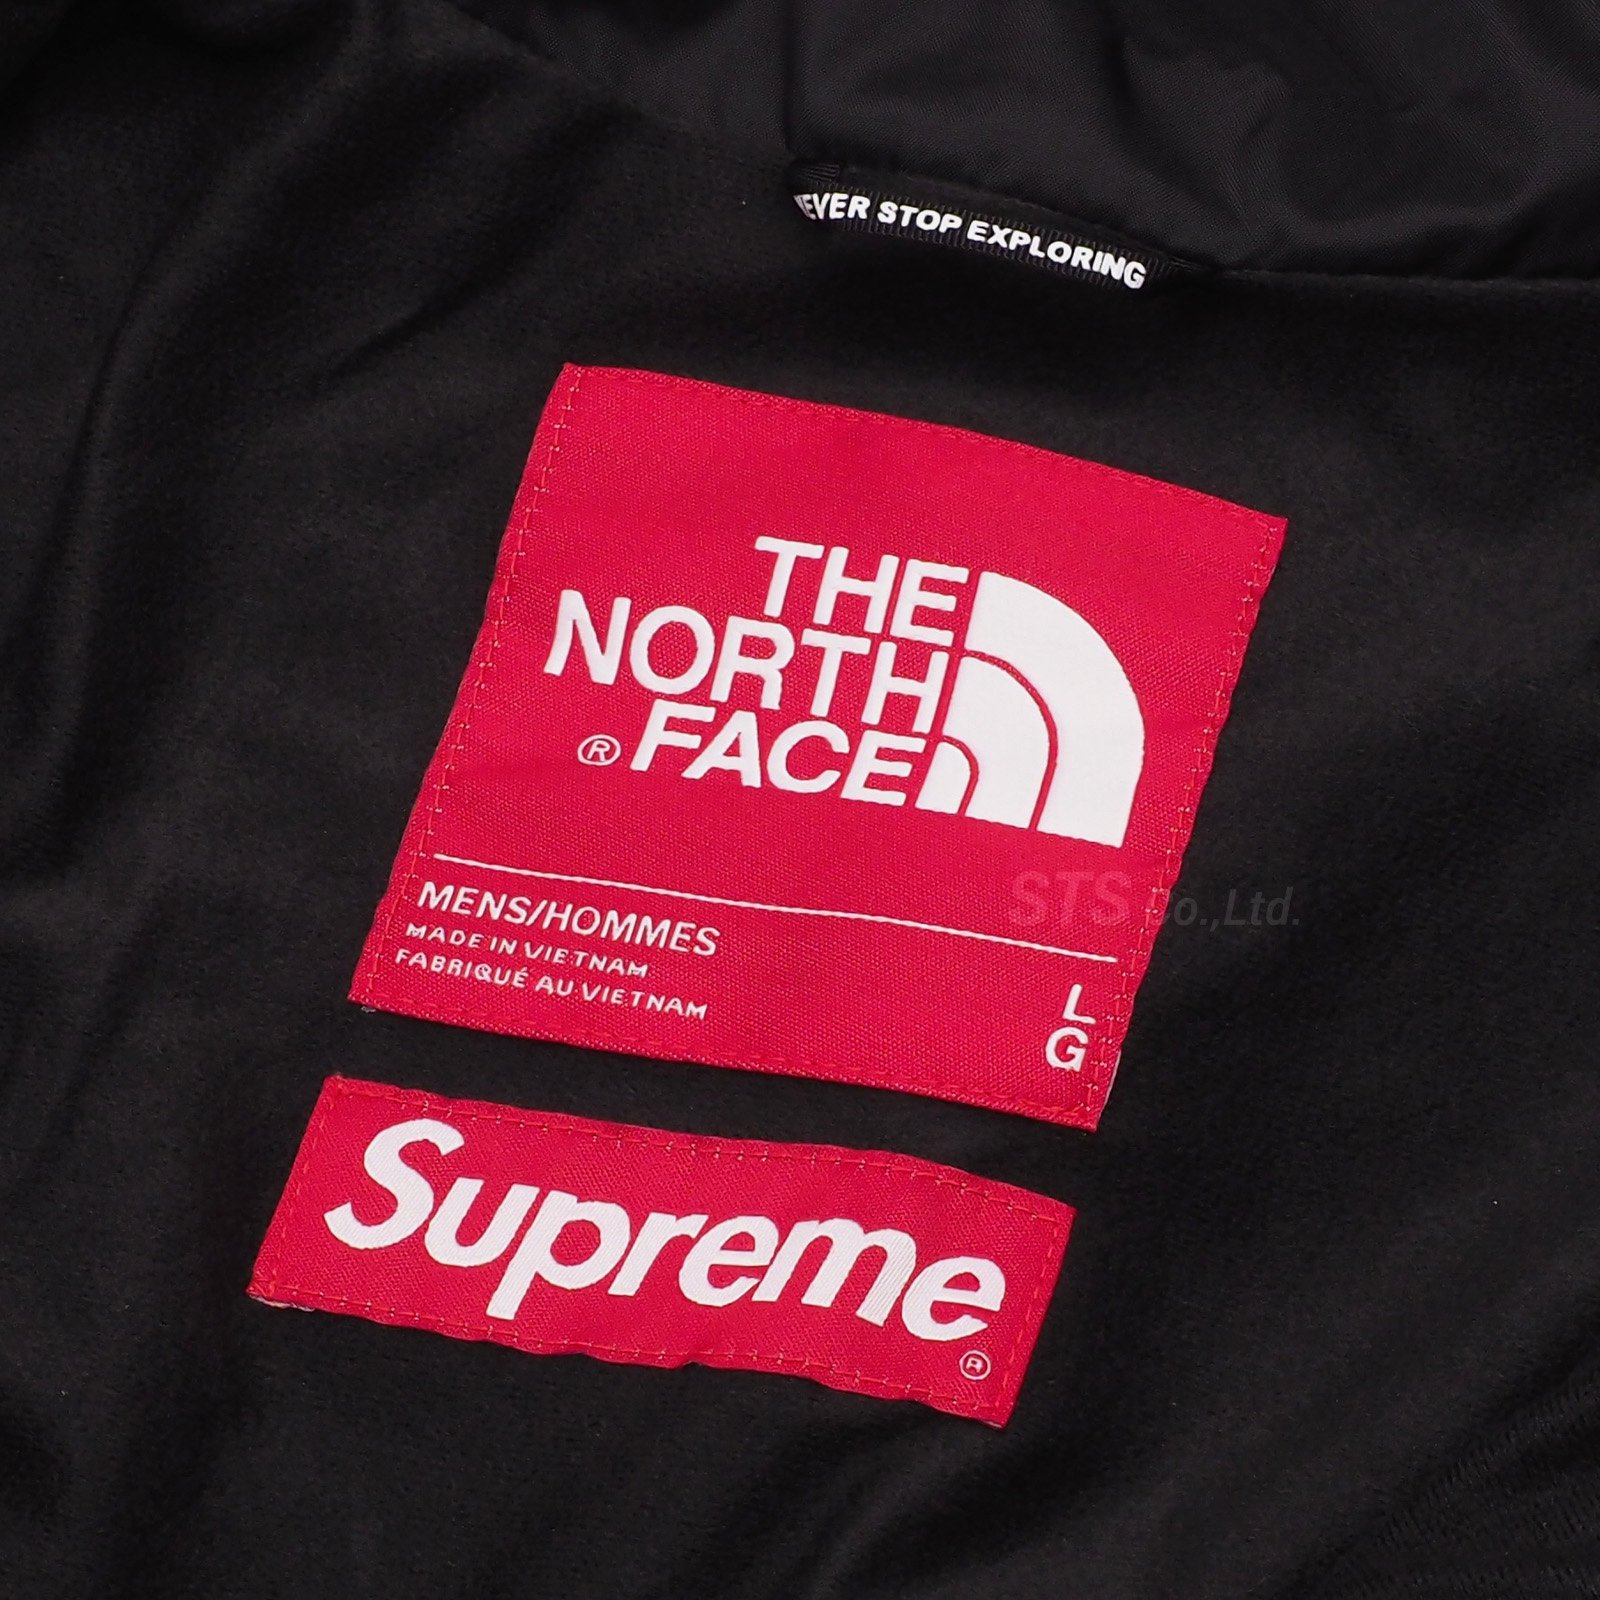 Supreme/The North Face S Logo Mountain Jacket - ParkSIDER